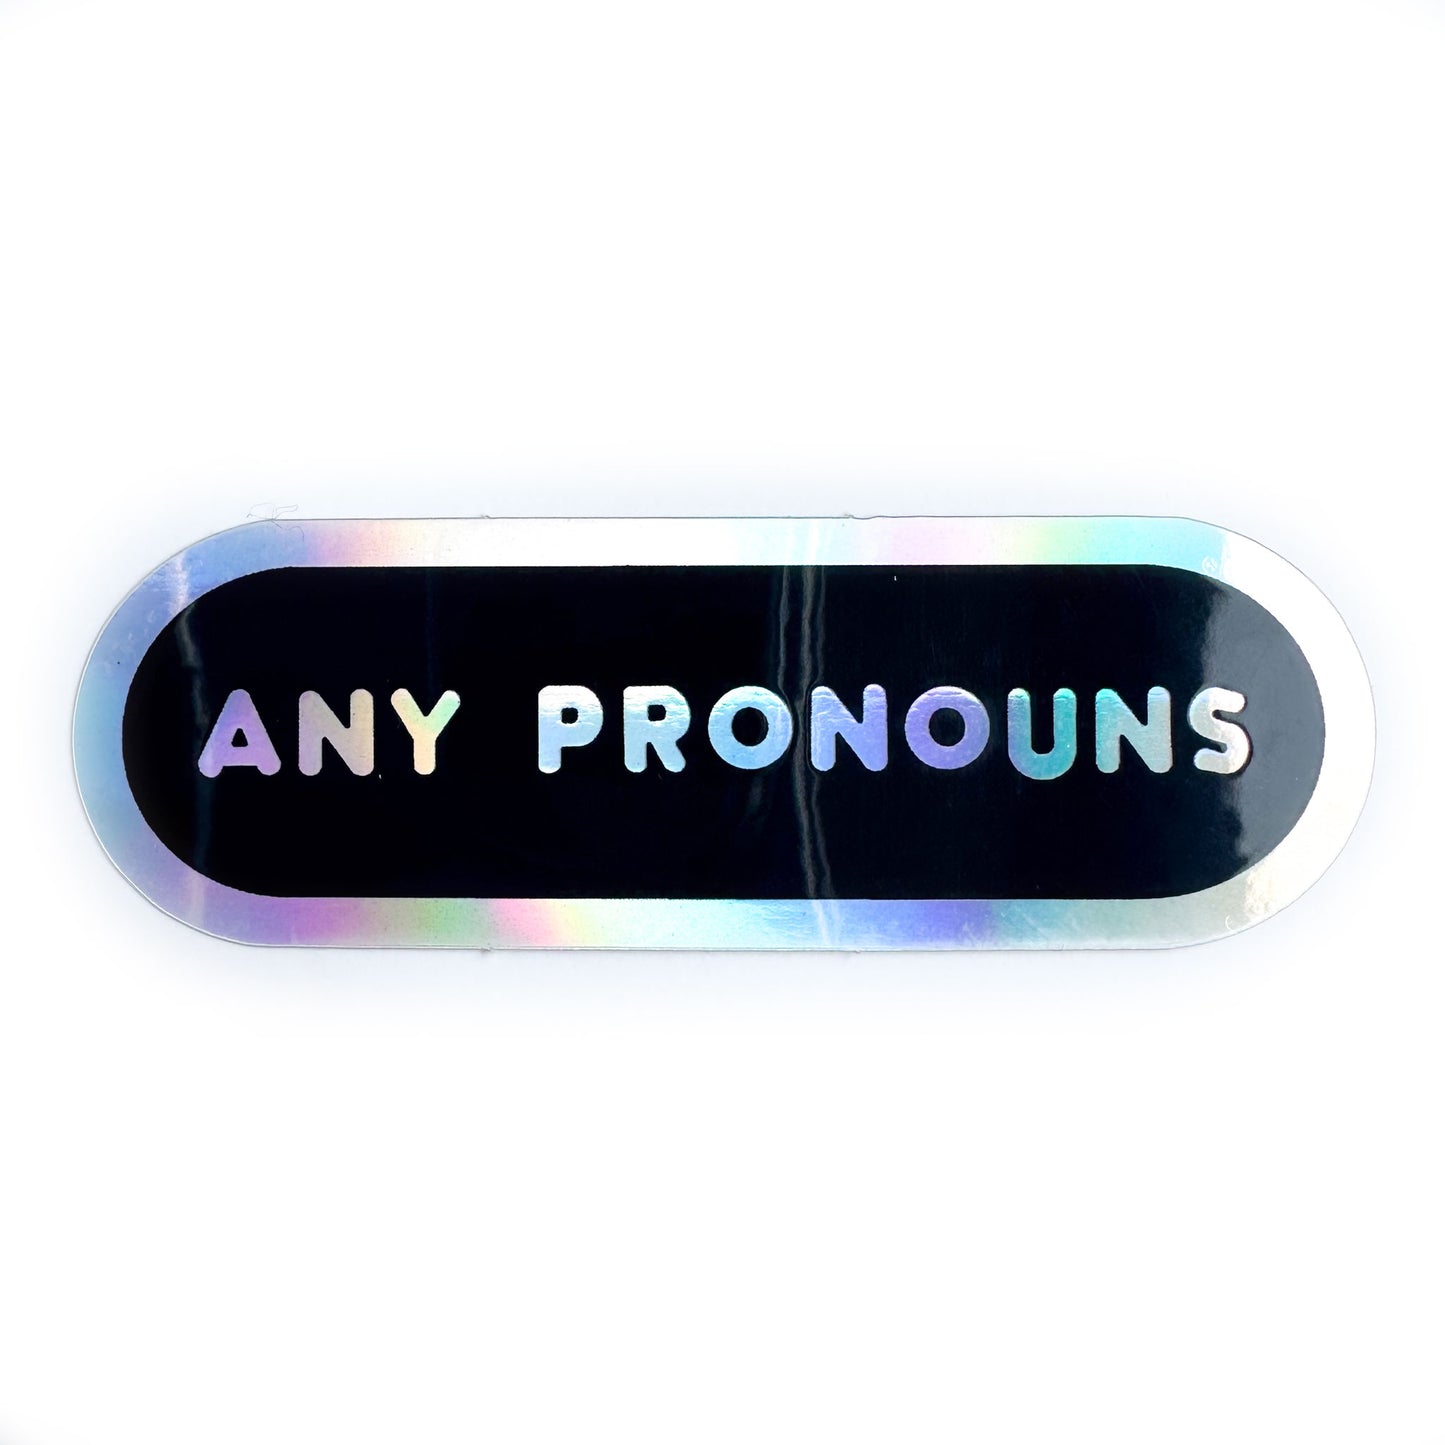 A holographic capsule sticker with a black background with holographic words reading "Any Pronouns"